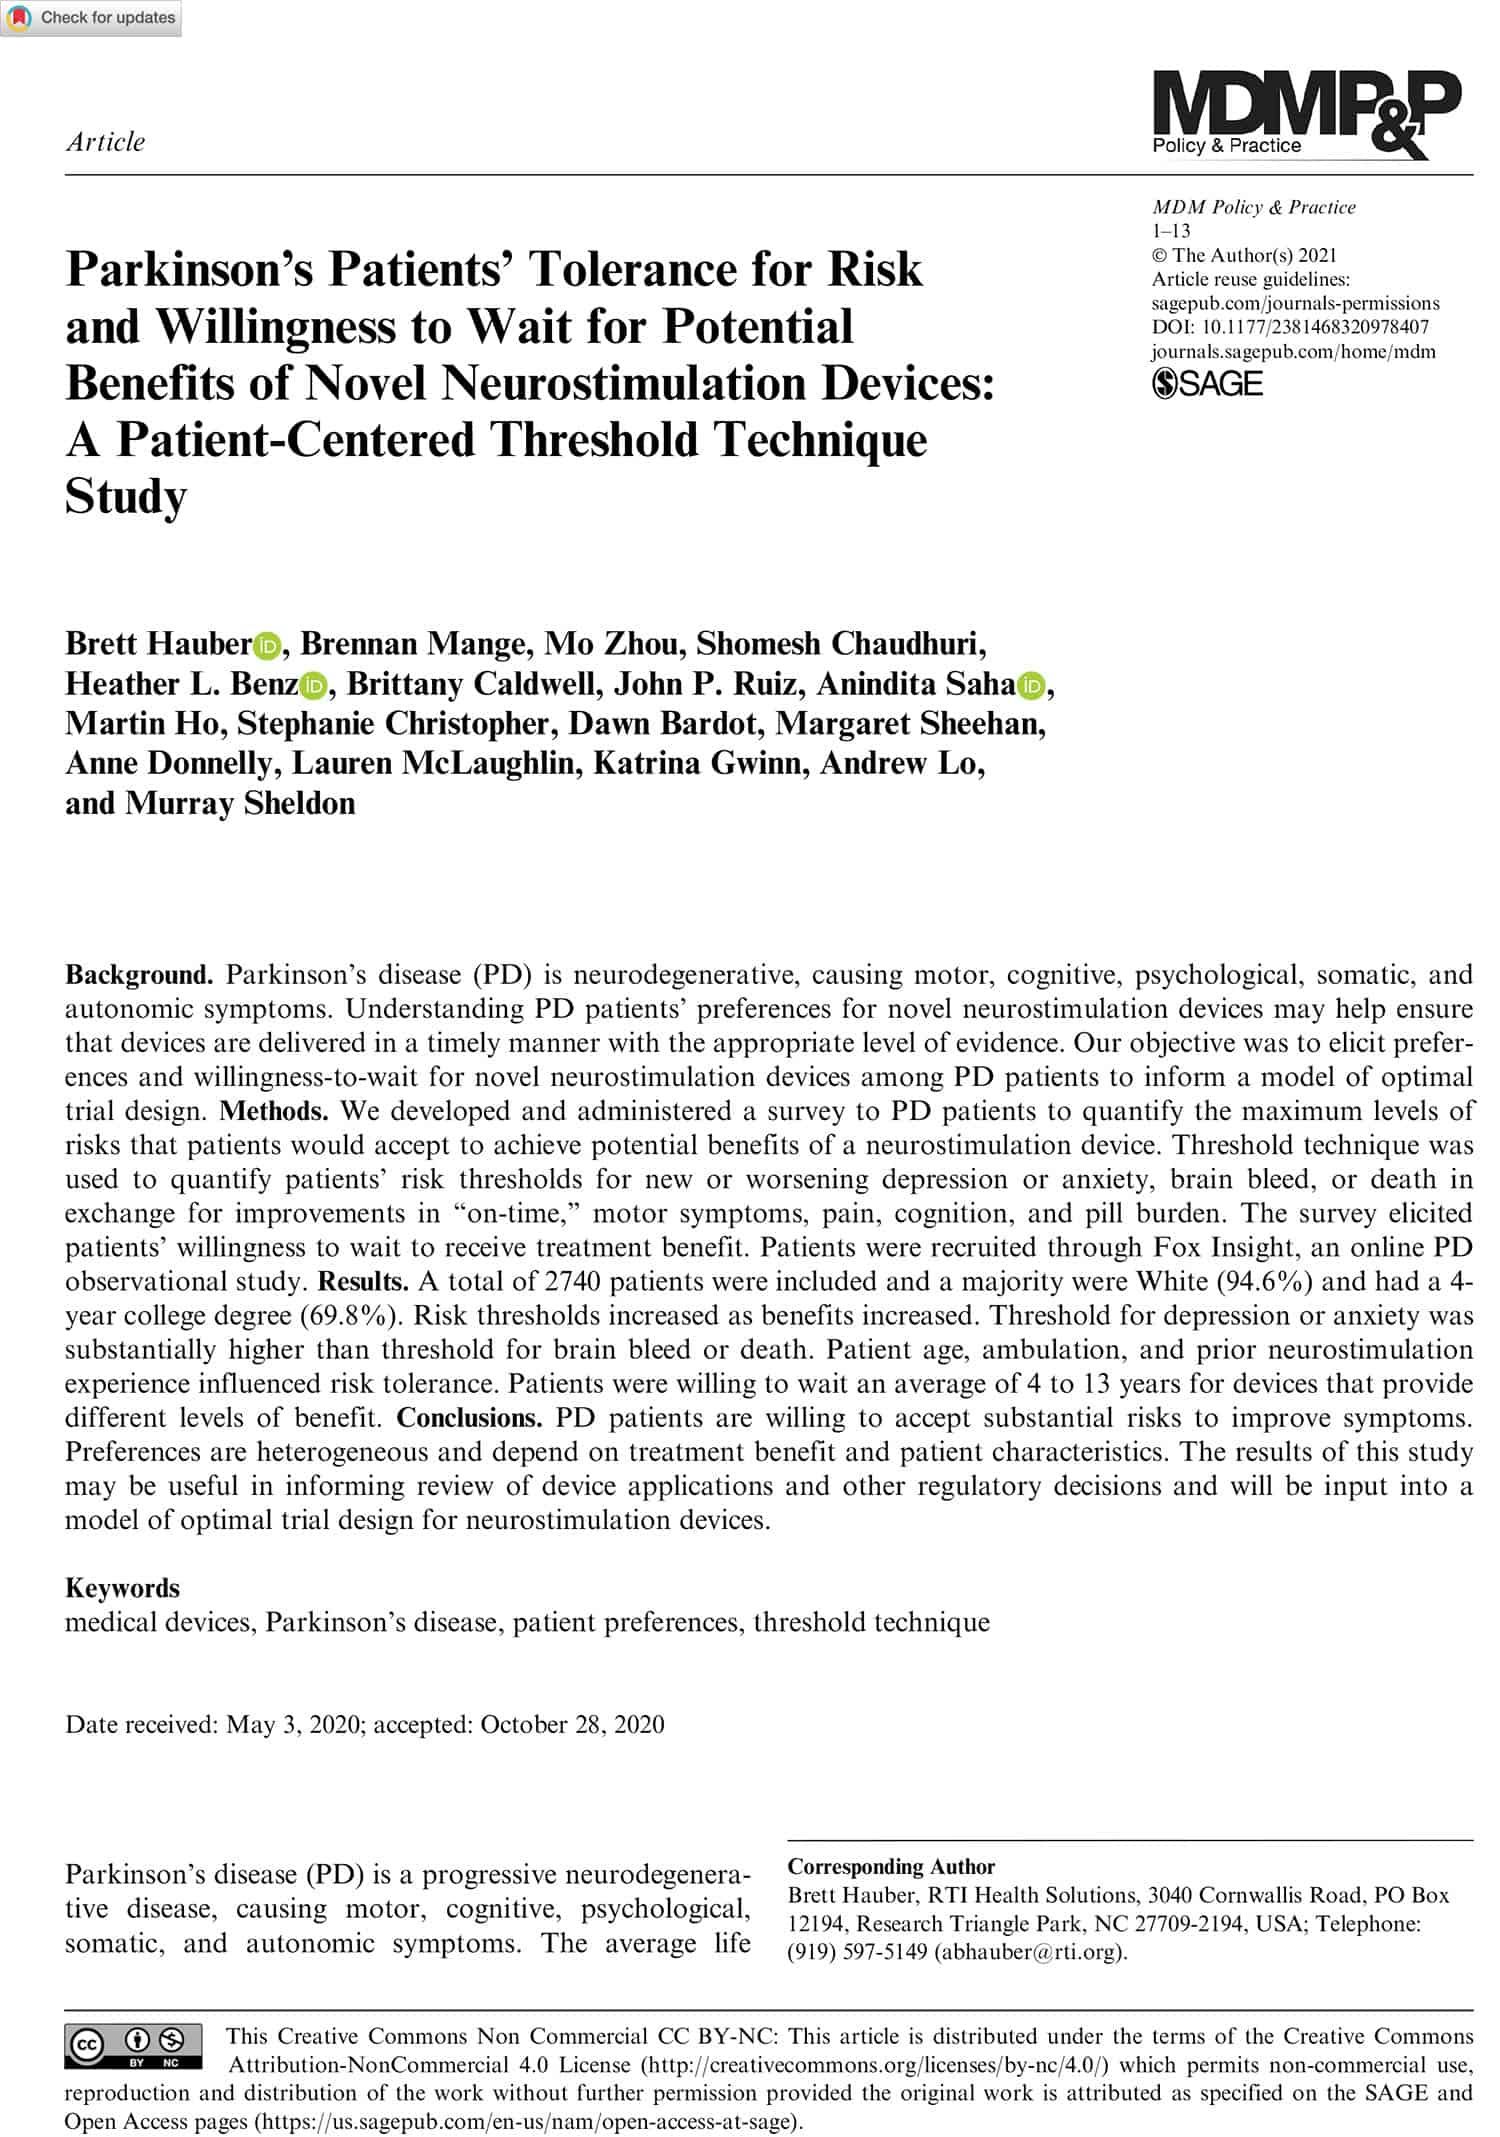 Parkinson’s Patients’ Tolerance for Risk and Willingness to Wait for Potential Benefits of Novel Neurostimulation Devices: A Patient-Centered Threshold Technique Study (PCOR Project Aim 2 paper)